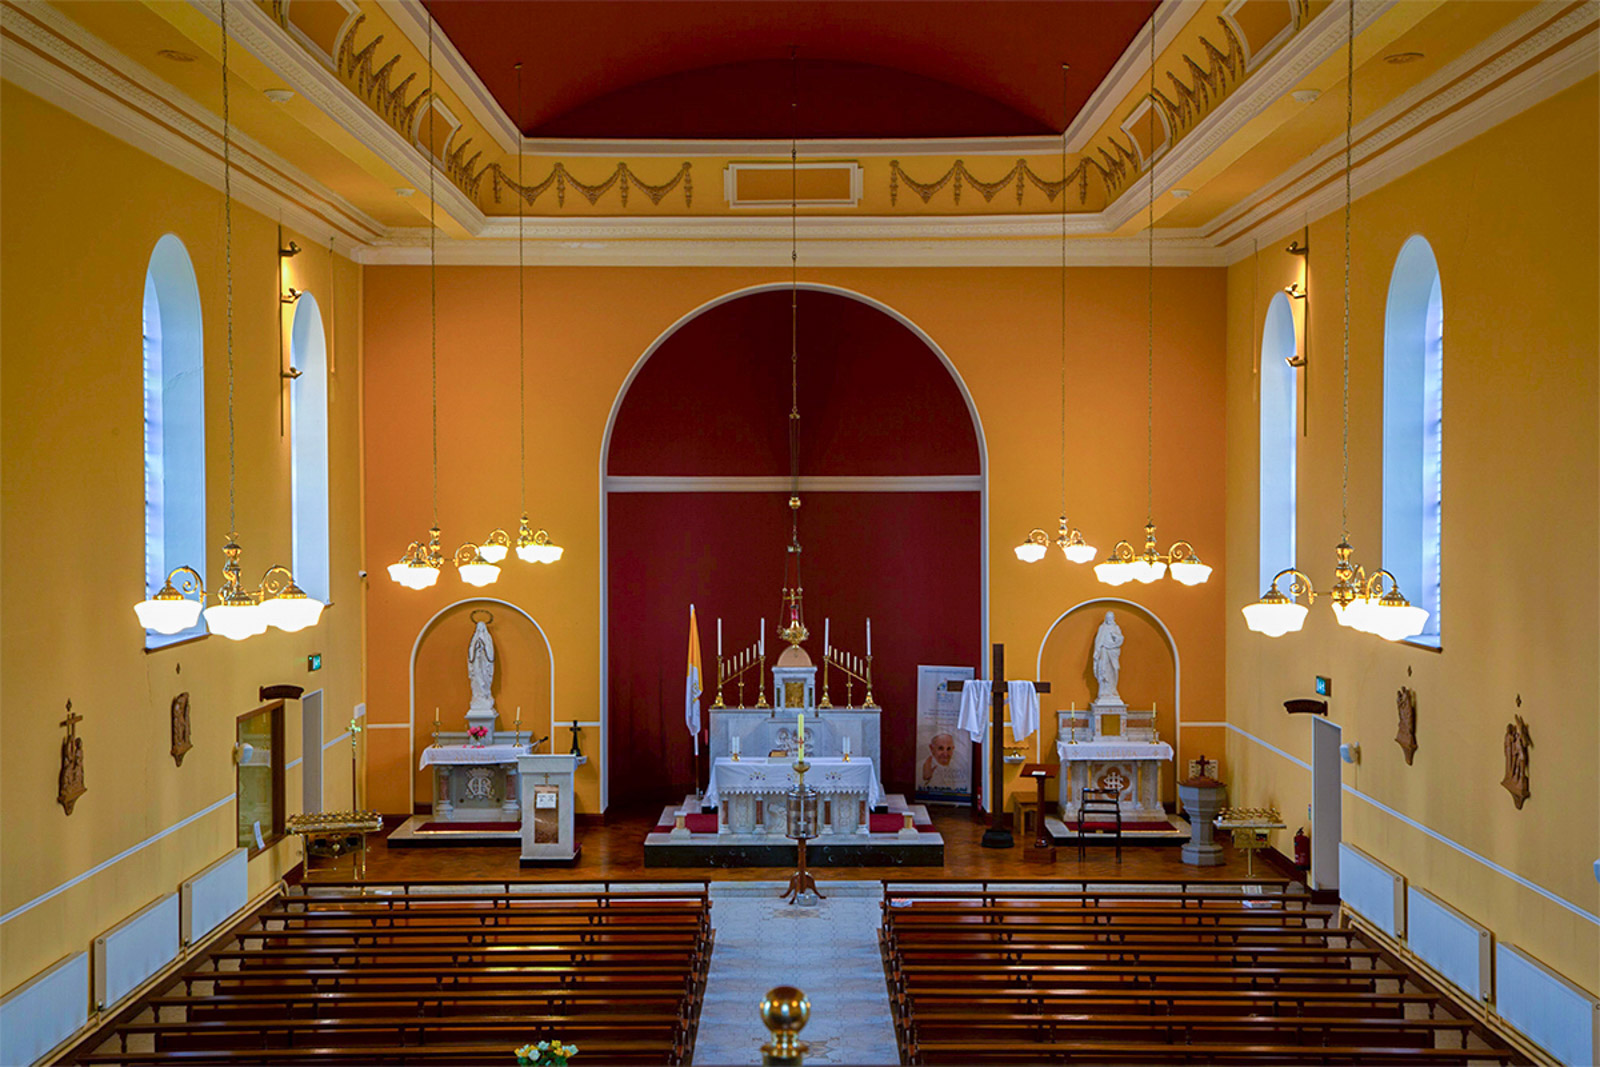 Church of the Immaculate Conception, Drung, Co. Cavan, Ireland